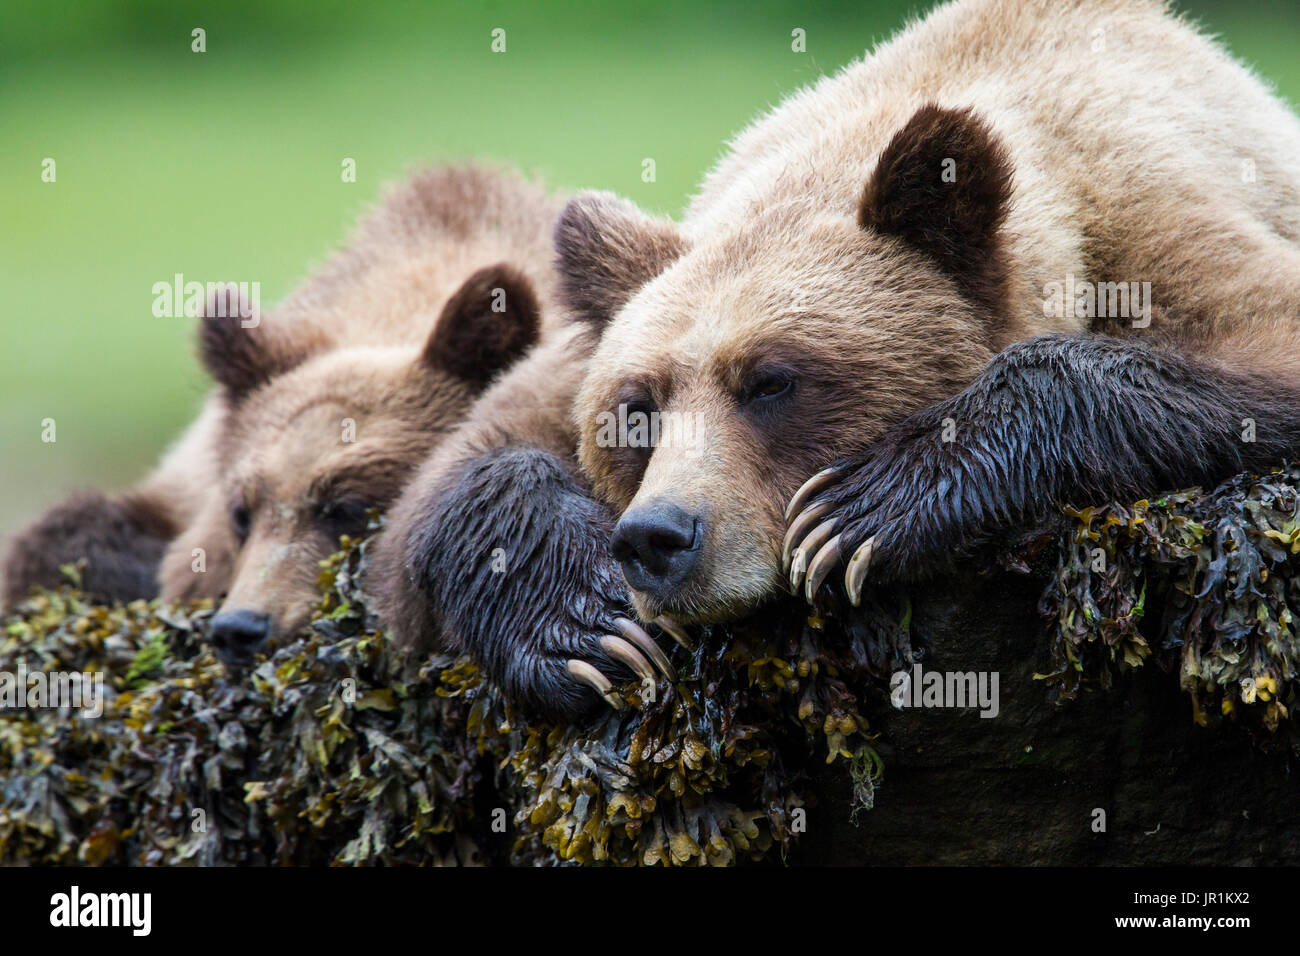 Grizzly (Ursus arctos horribilis) female and her cub at rest, Khutzeymateen Grizzly Bear Sanctuary, British Columbia, Canada Stock Photo